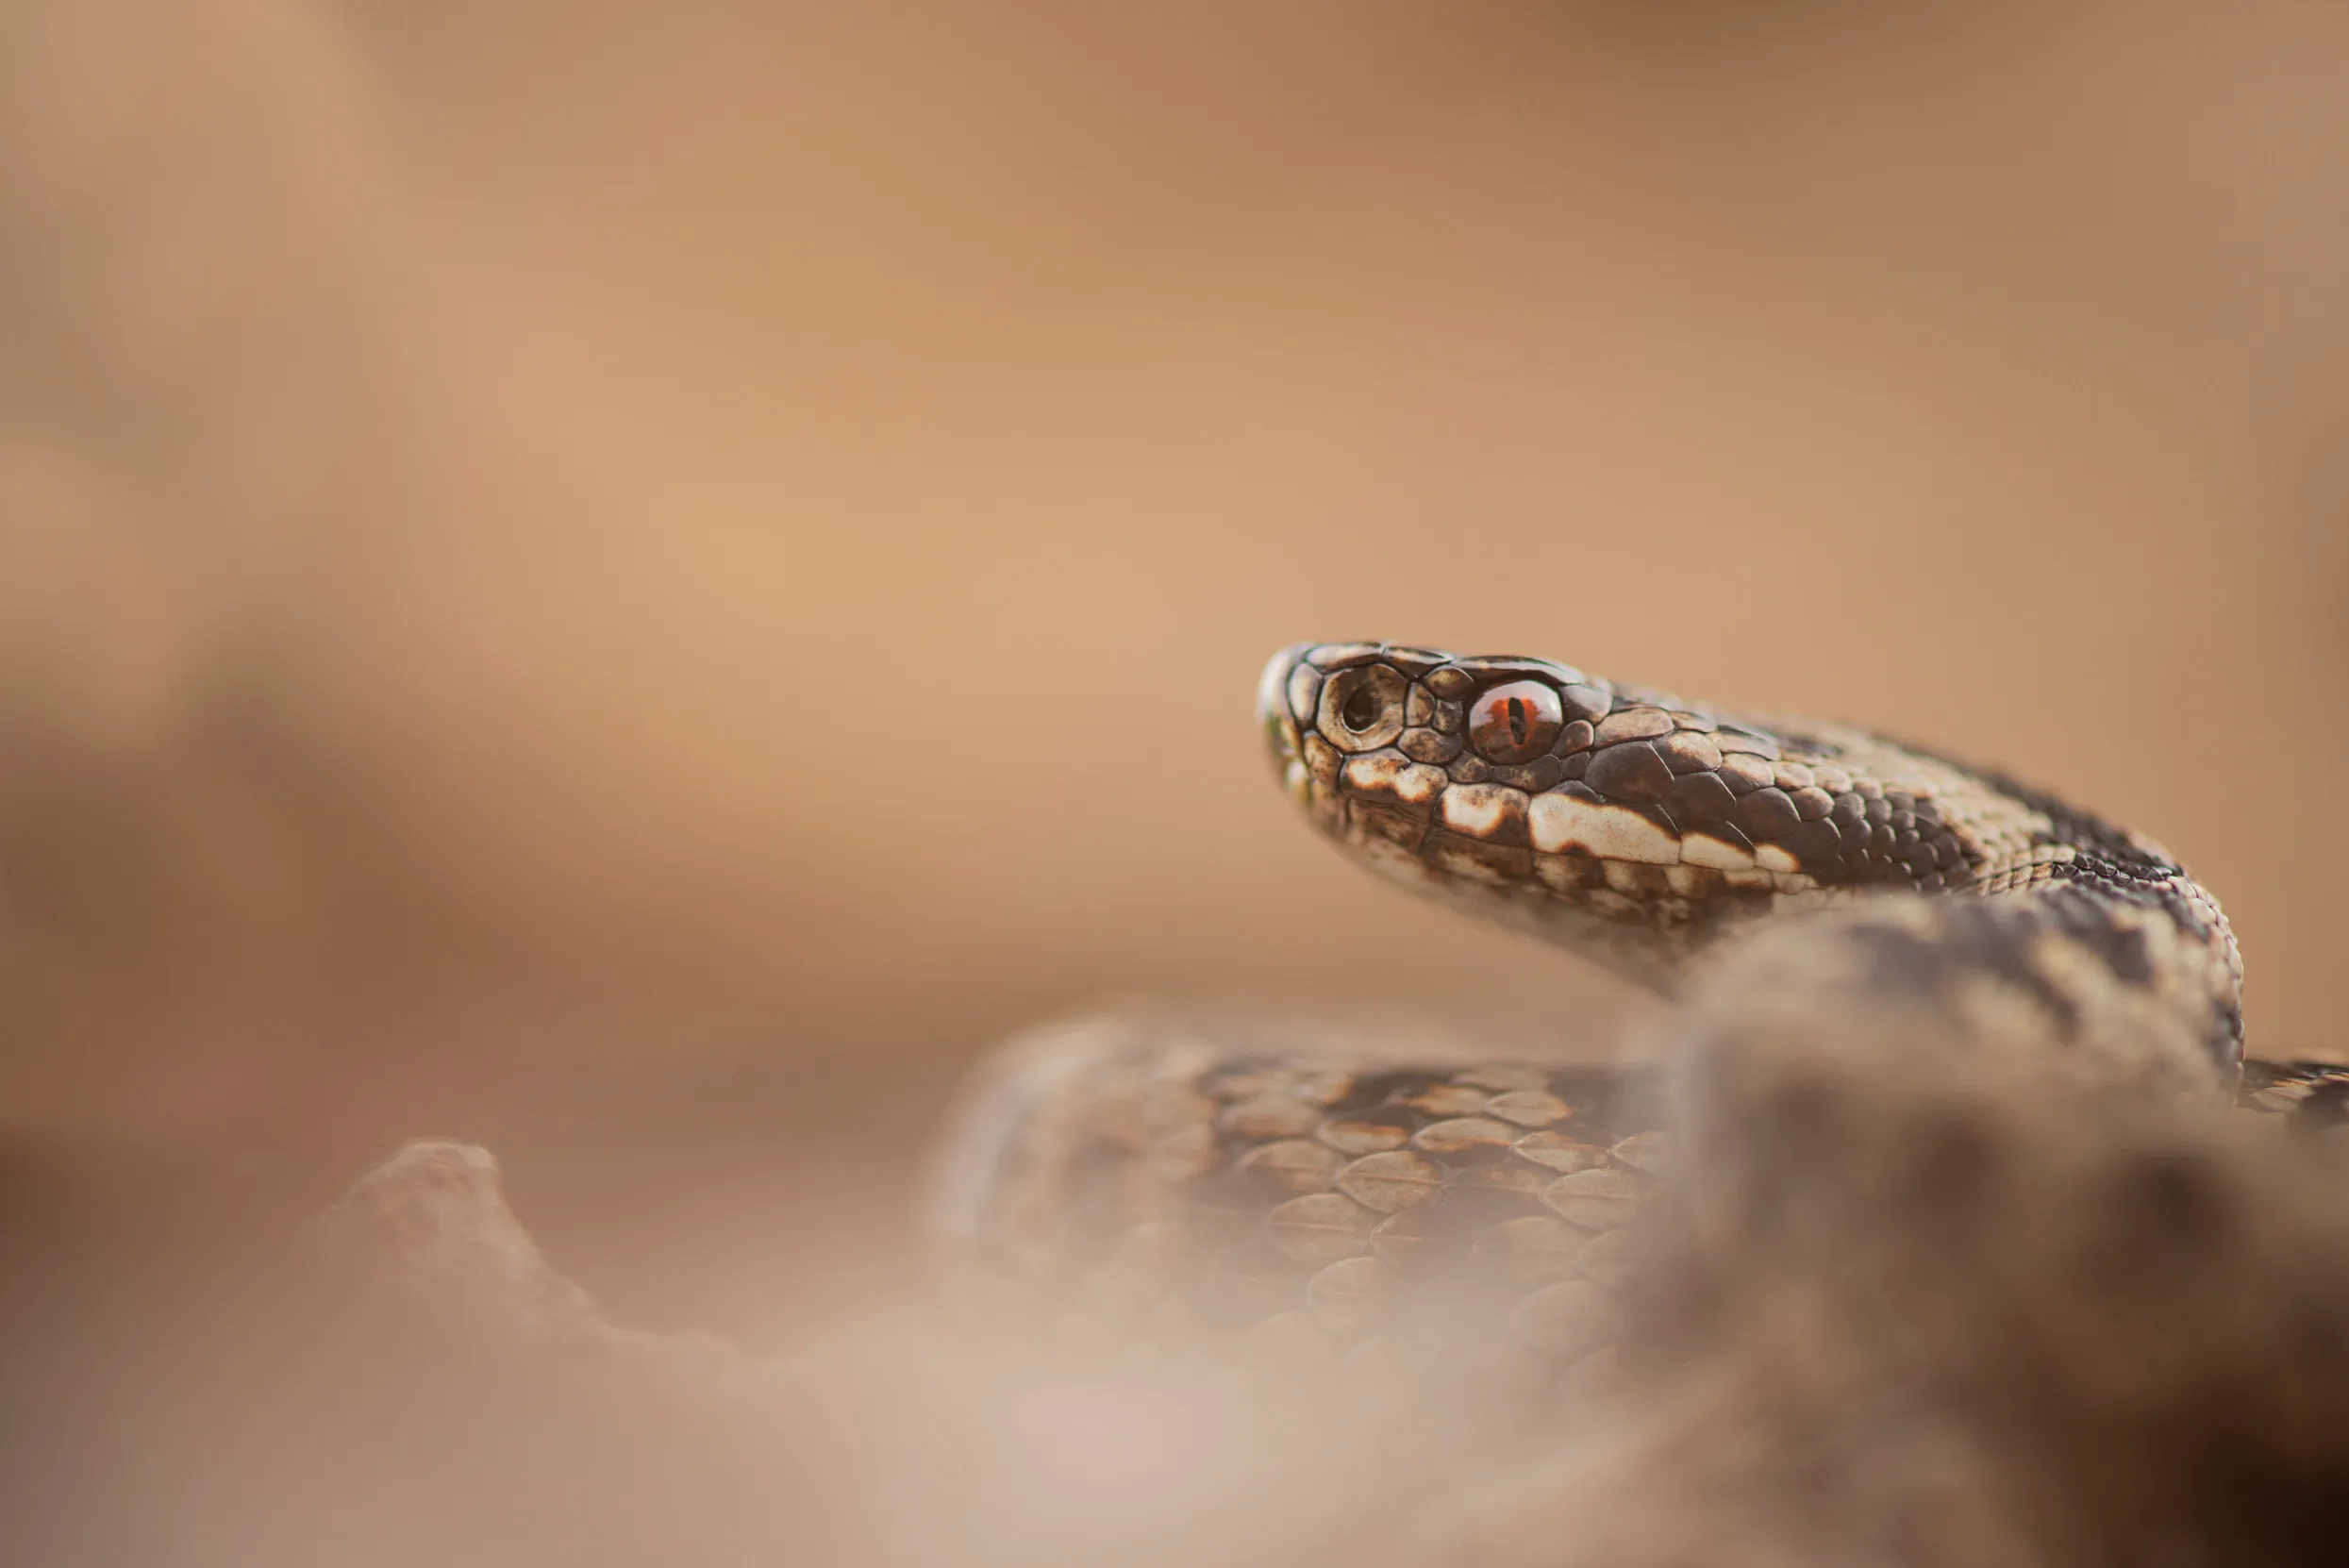 An Adder coiled up with a blurred neutral brown background.